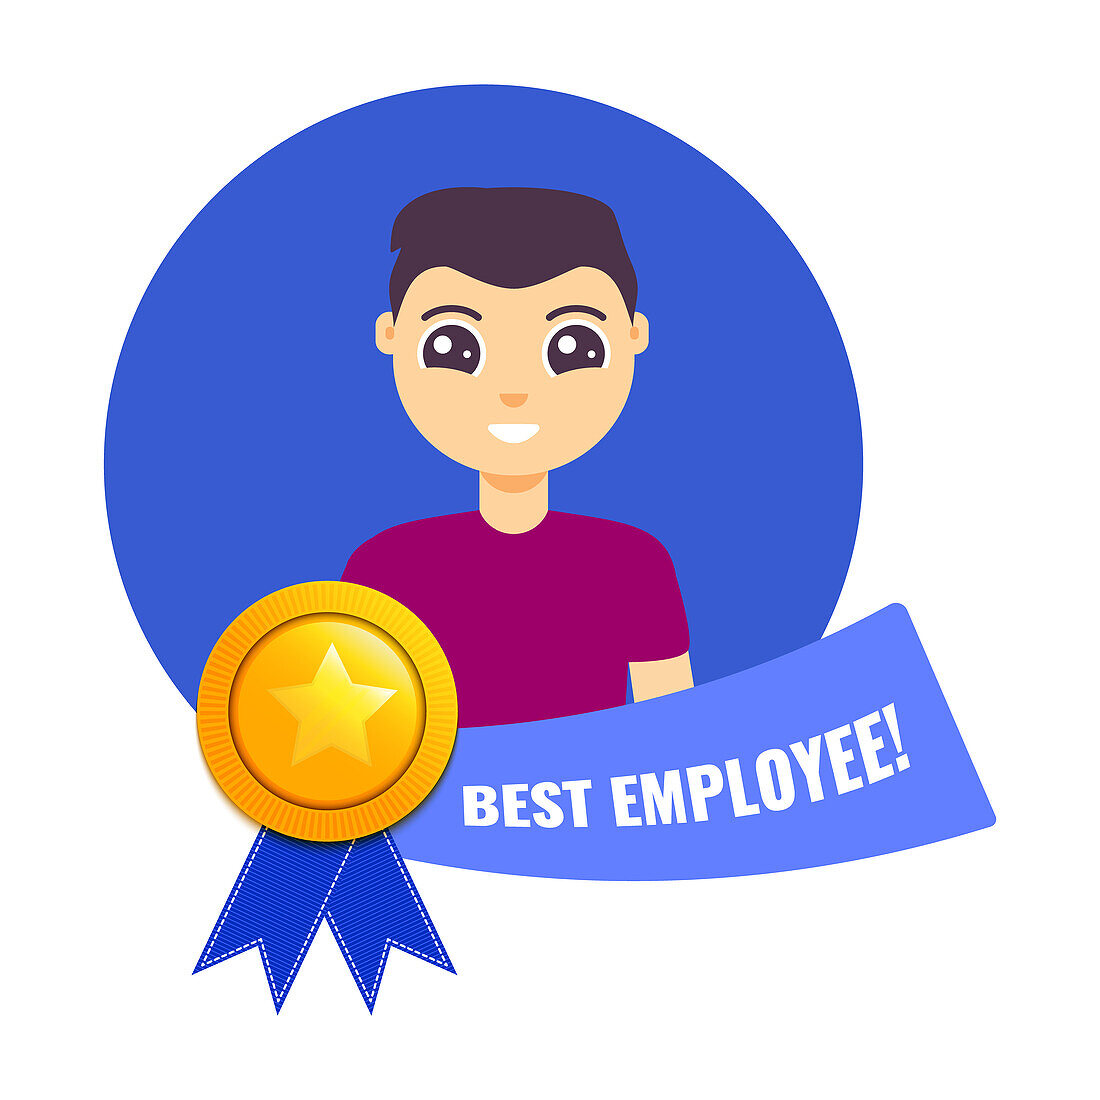 Best employee recognition award, conceptual illustration